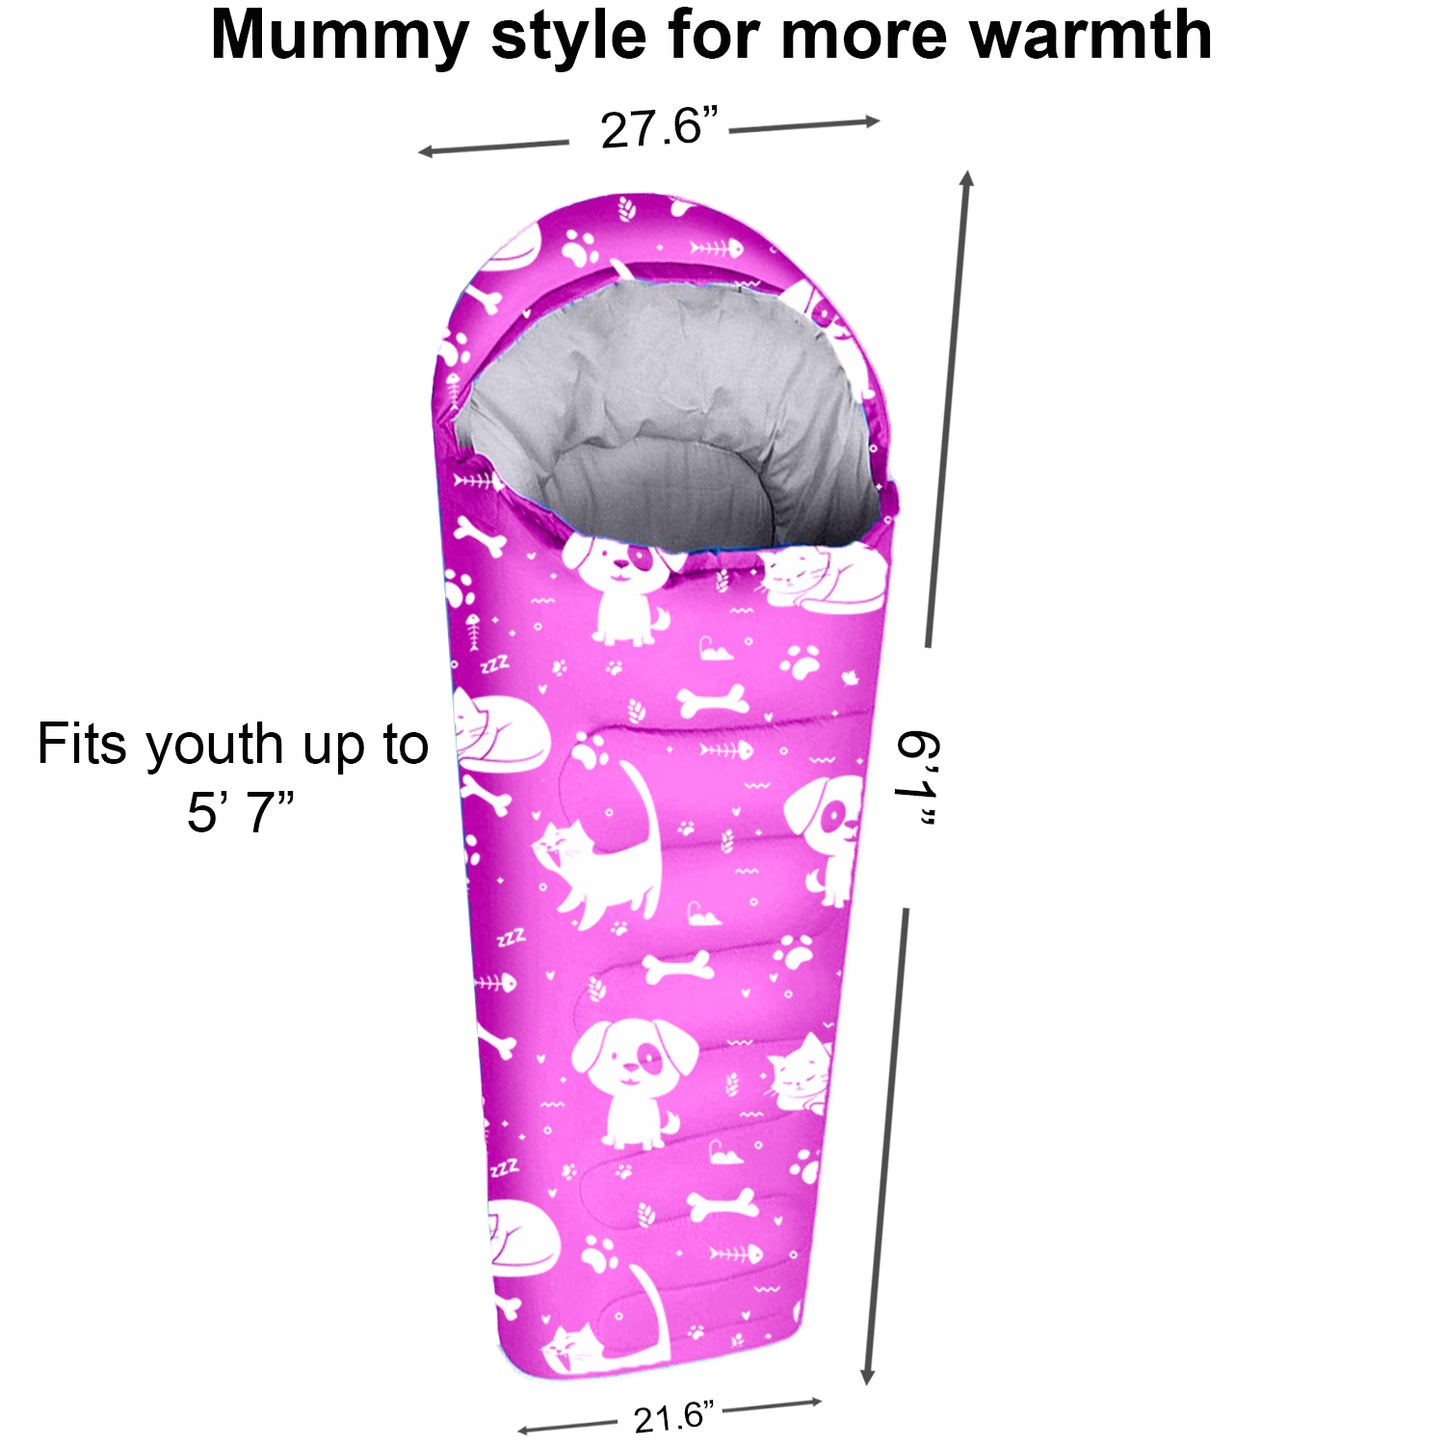 Best Friends Theme 4 Seasons Indoor/Outdoor Youth Sleeping Bags - Youth version